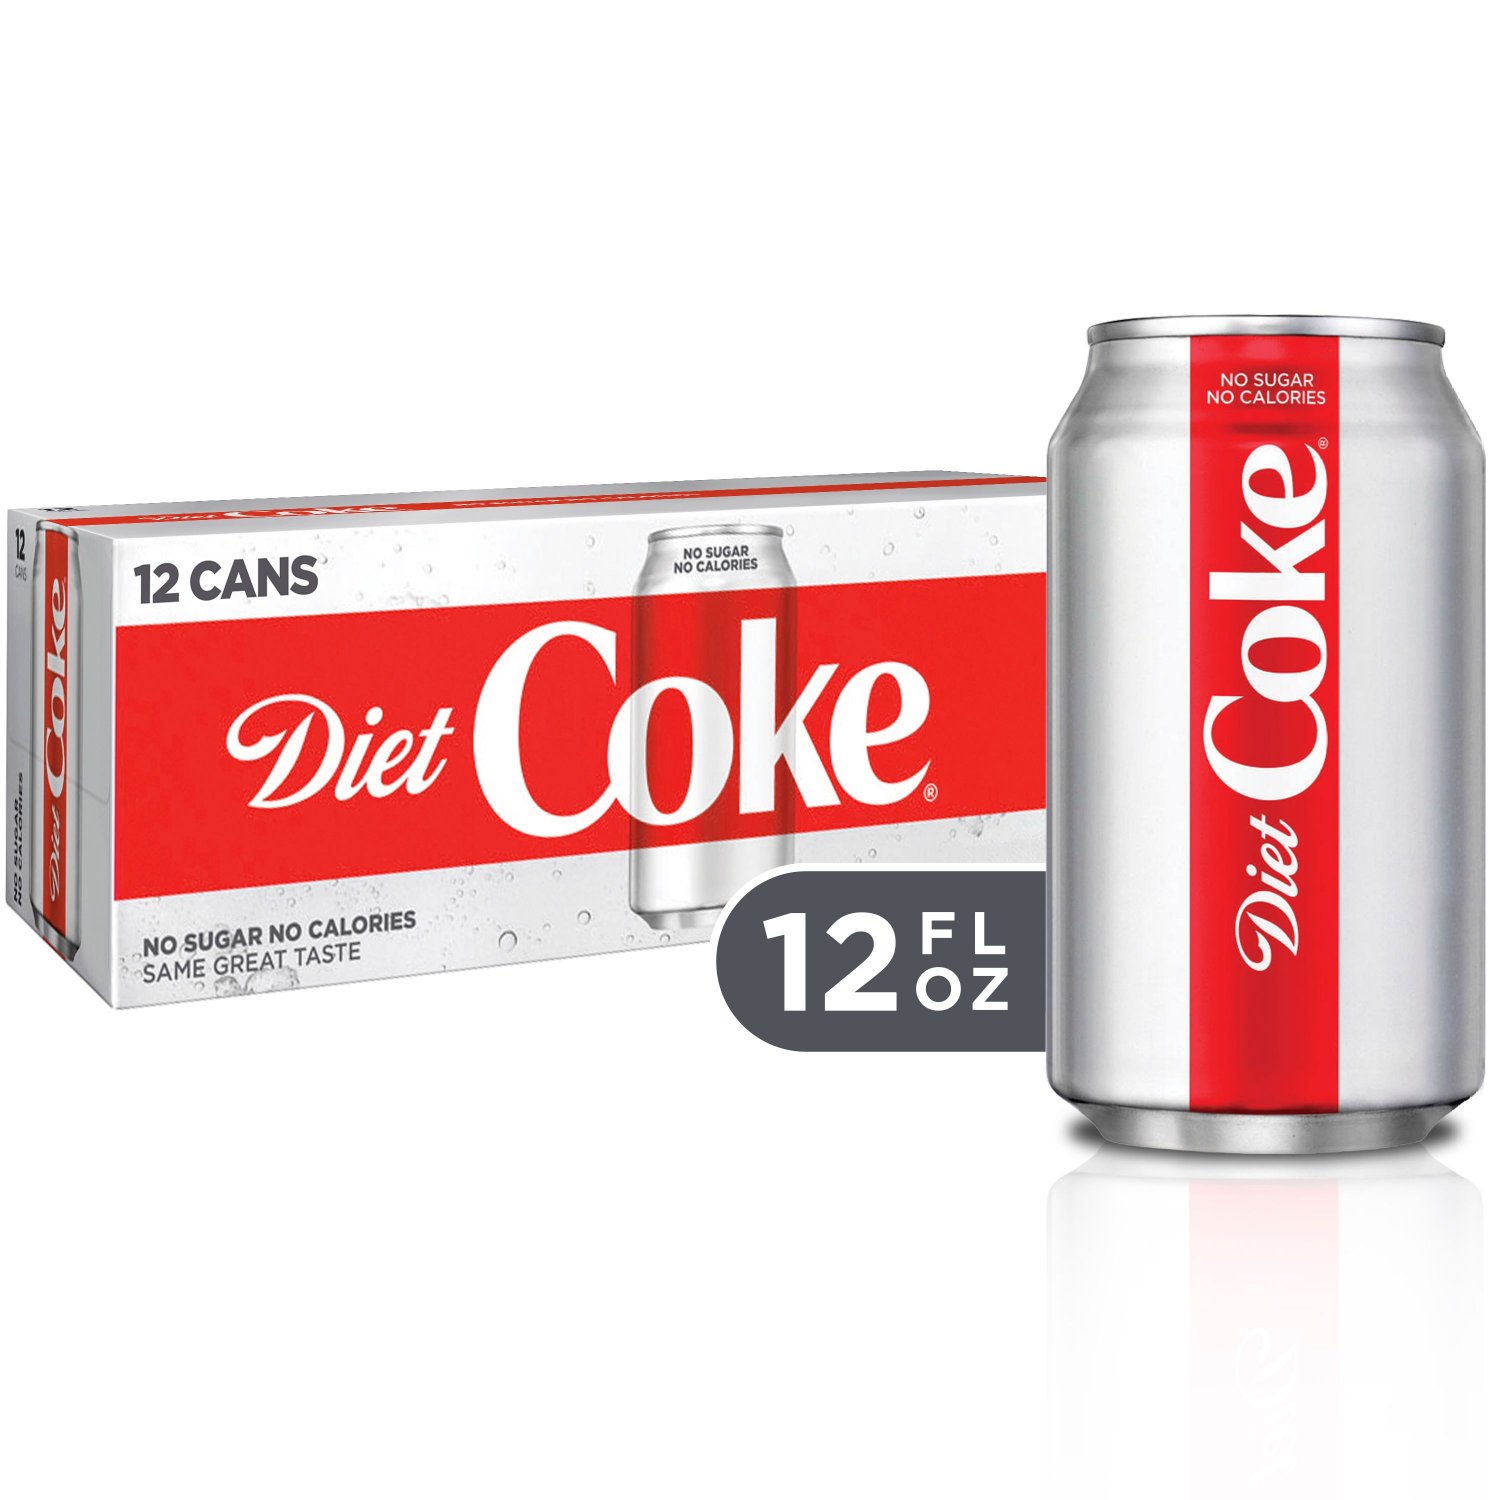 Diet Coke Soda Soft Drink (12oz Can) 12 Cans